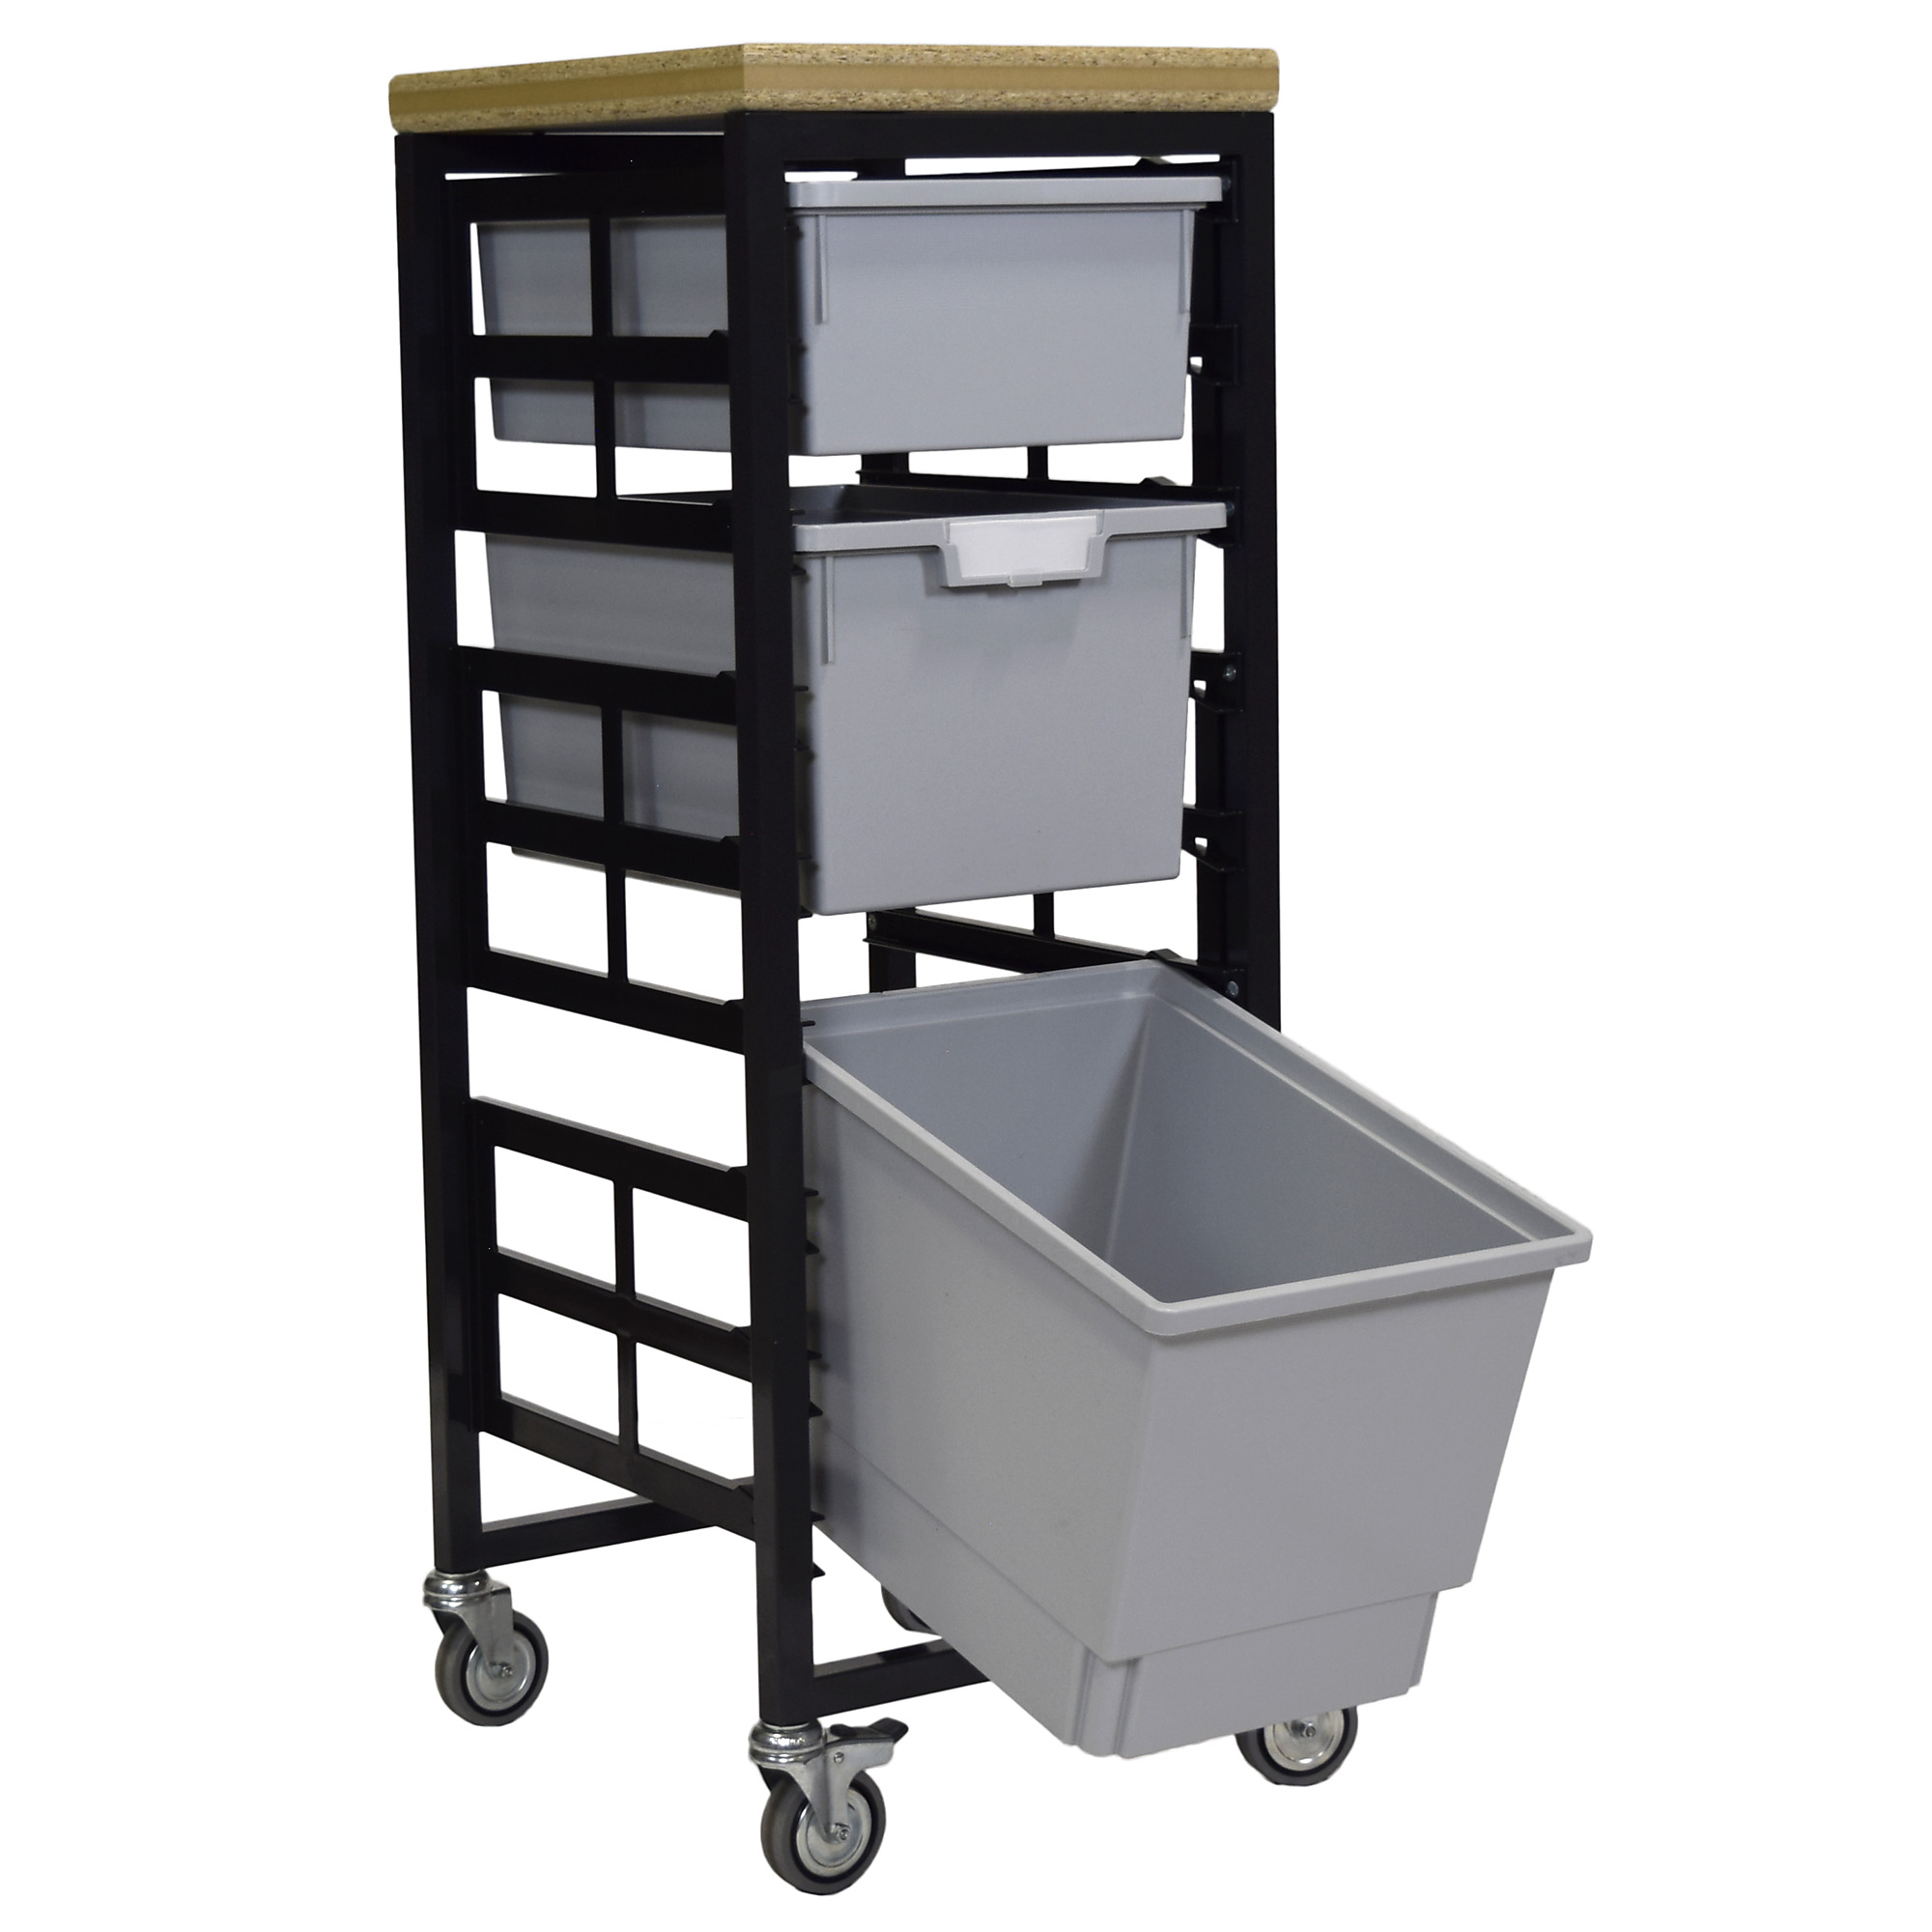 Certwood StorWerks, Mobile Work Station w/Wood Top -3 Trays-Gray, Included (qty.) 3, Material Plastic, Height 3 in, Model CE2097DGGC-1D1T1QLG